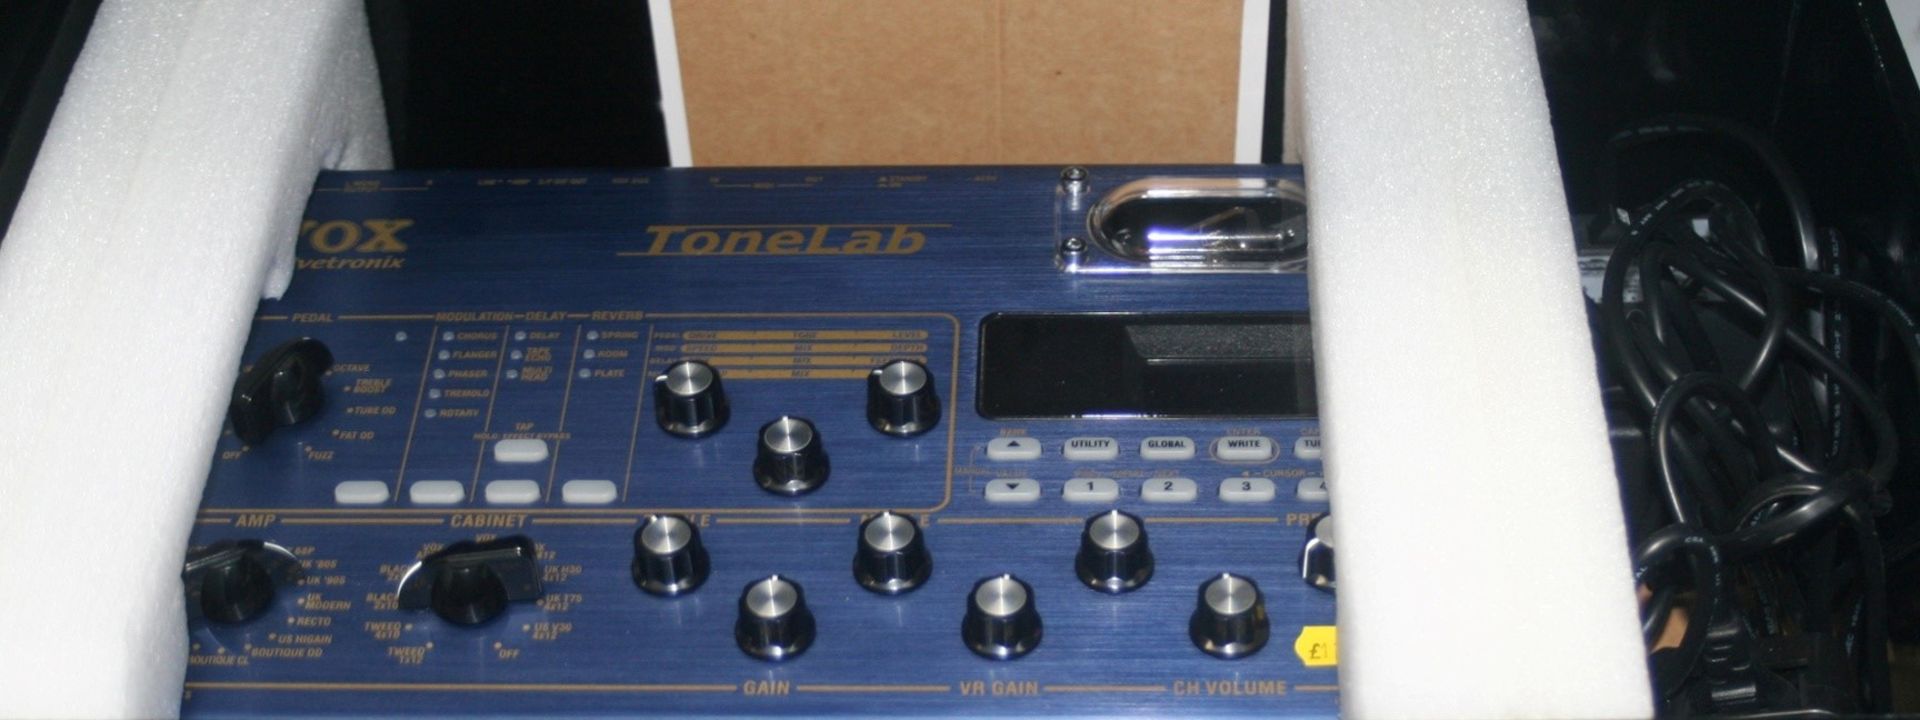 1 x Vox Valvetronix Tone Lab Guitar Amp Modelling Effects Unit – Ex Display Model – Boxed – Comes - Image 14 of 15